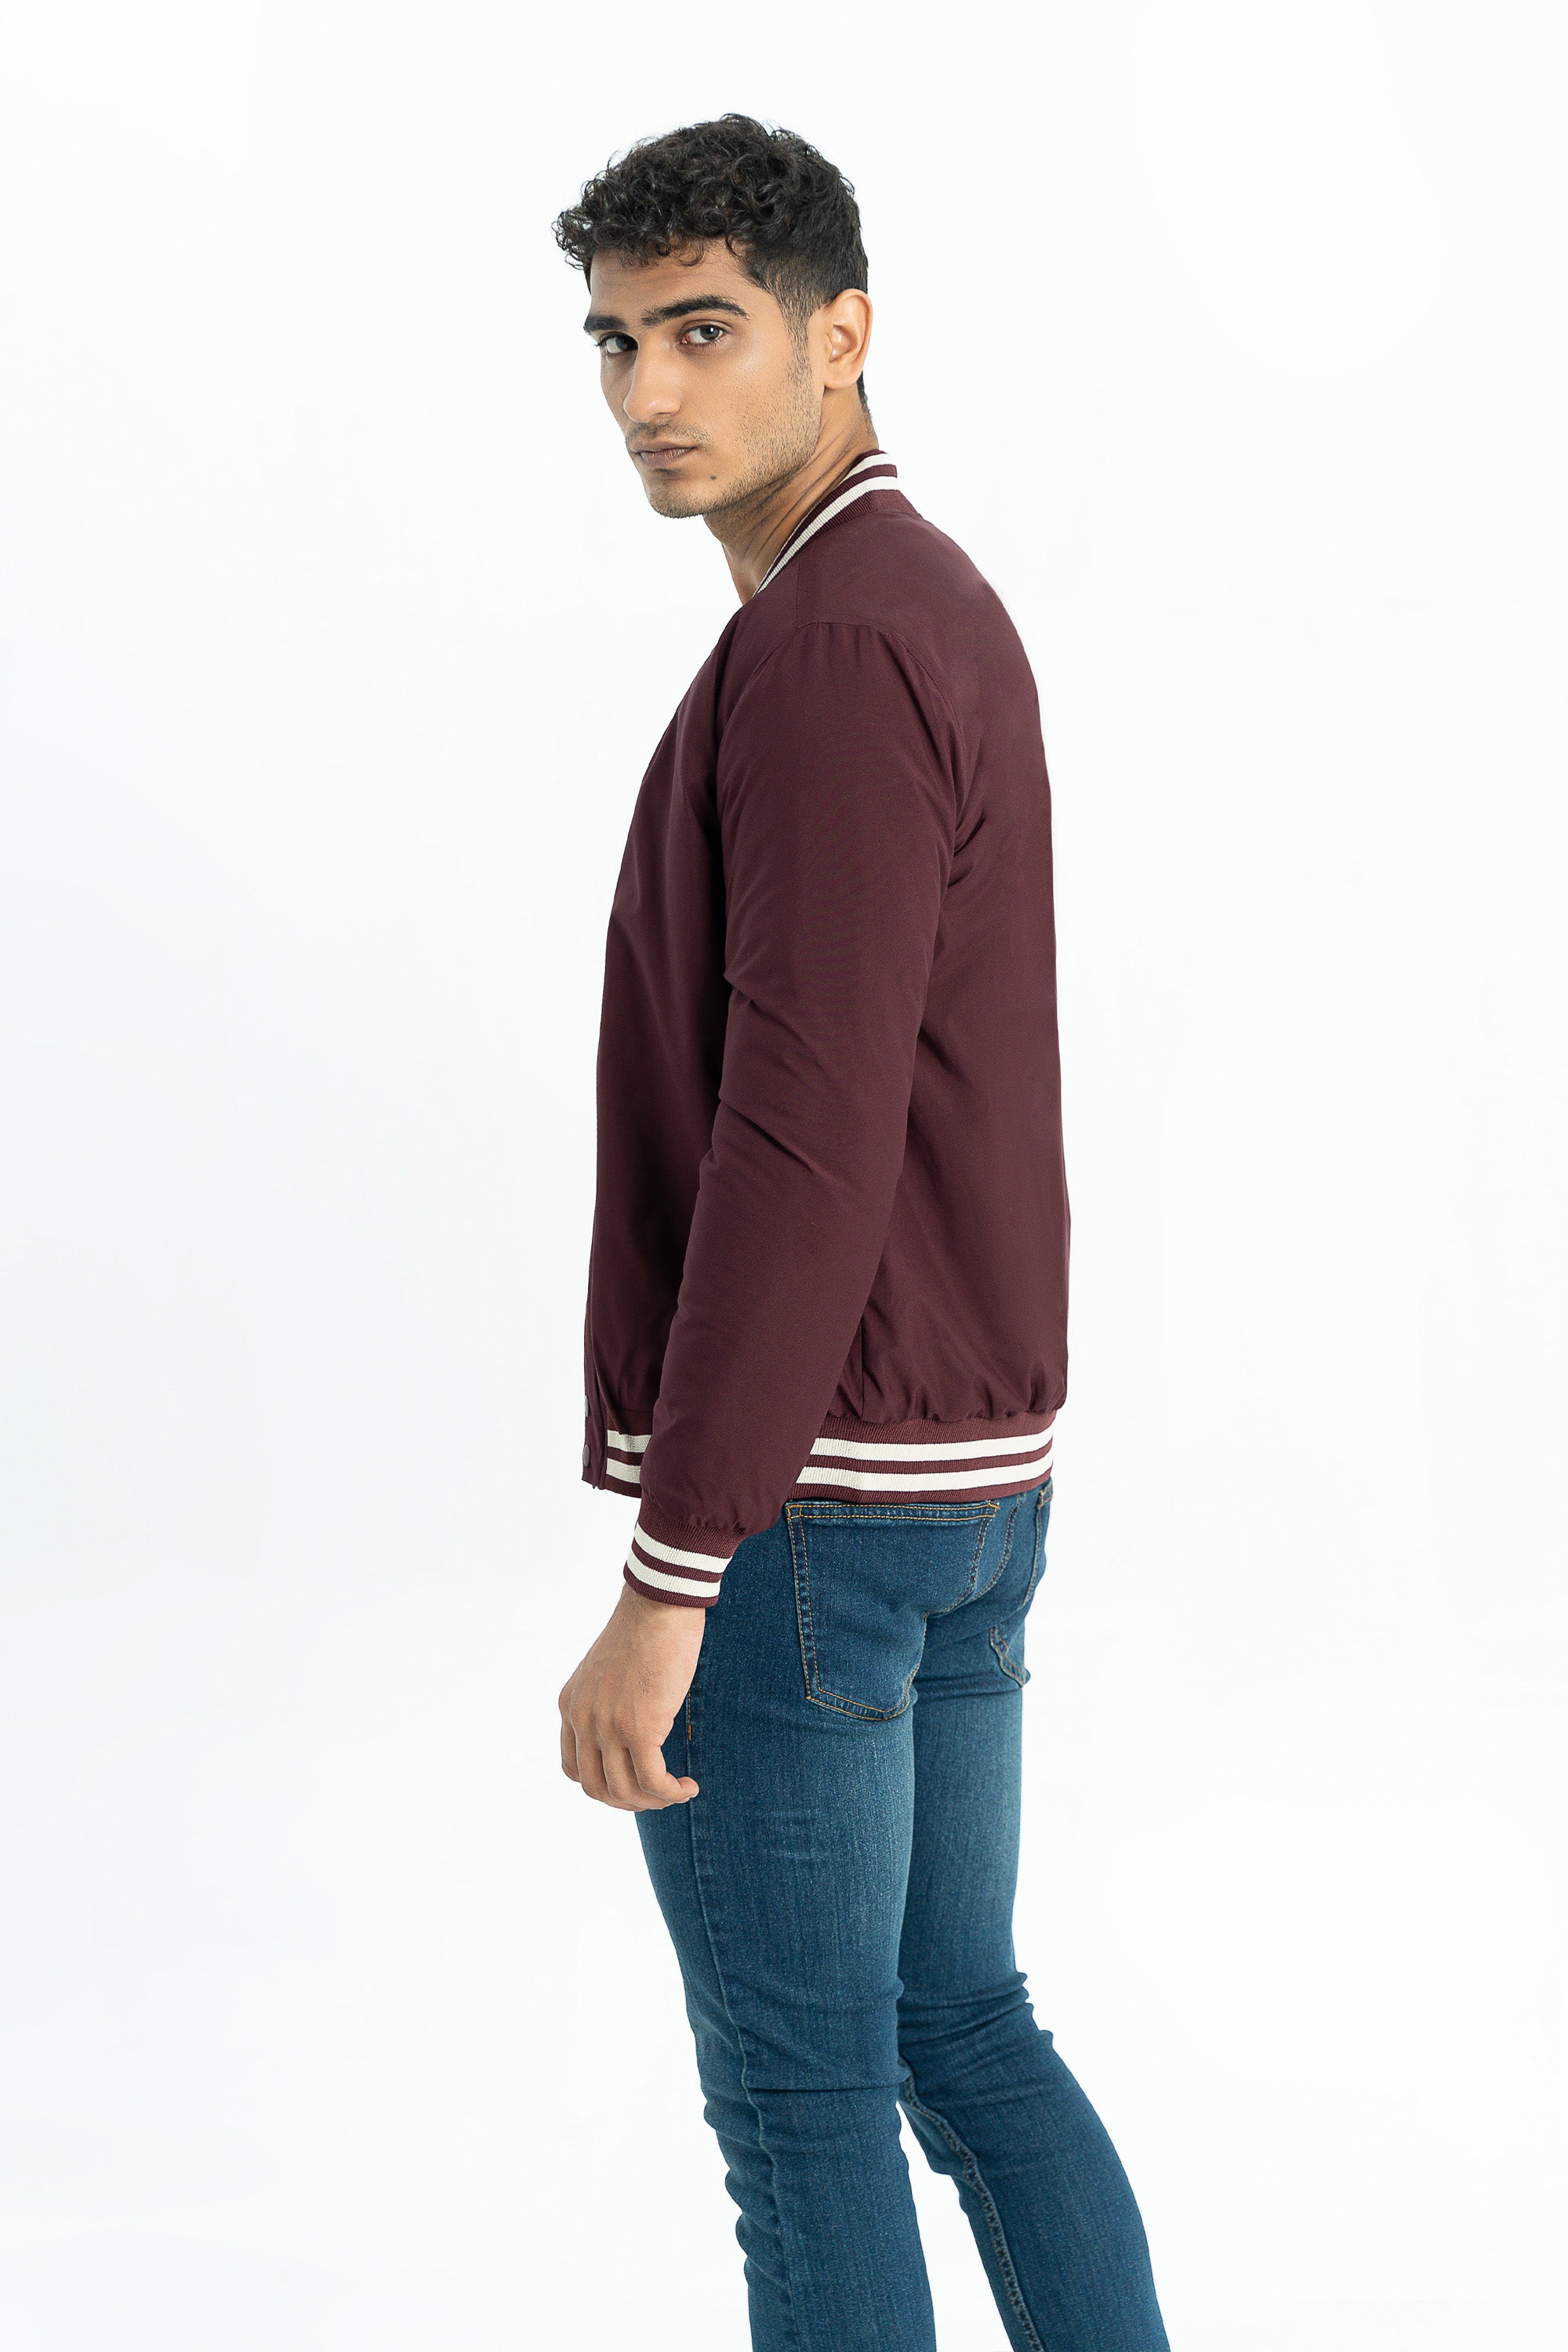 Maroon Bomber Jacket With White Stripped Collar